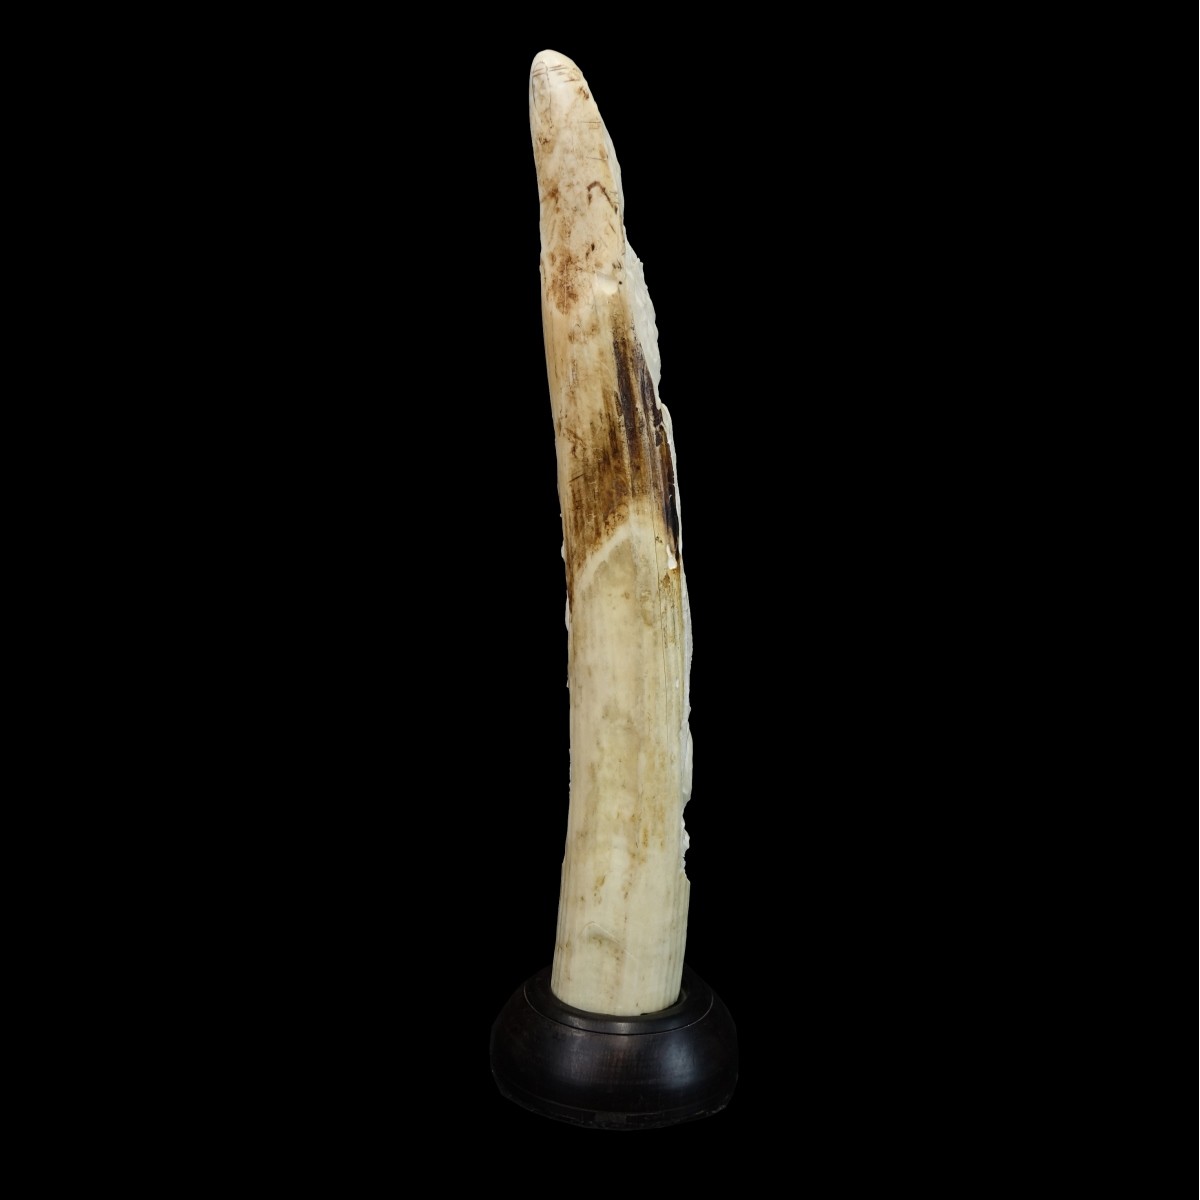 Antique African Relief Tusk Carving